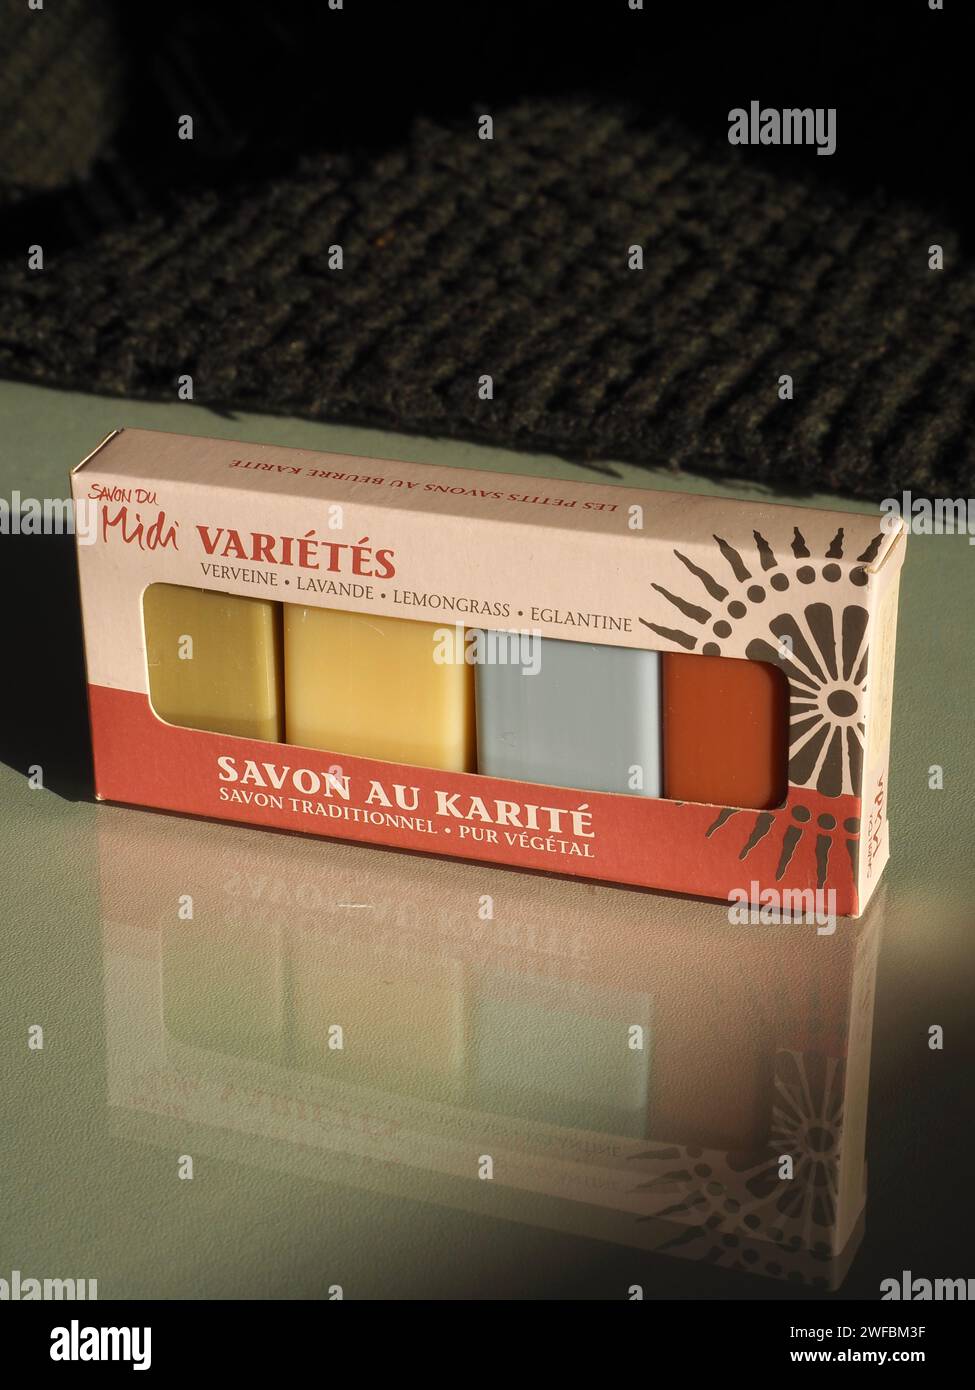 Variety pack of 4 guest soaps in verbena, lavender, lemongrass and wild rose scents. “Savon au karité”, Shea butter soap. Image reflected in glass. Stock Photo